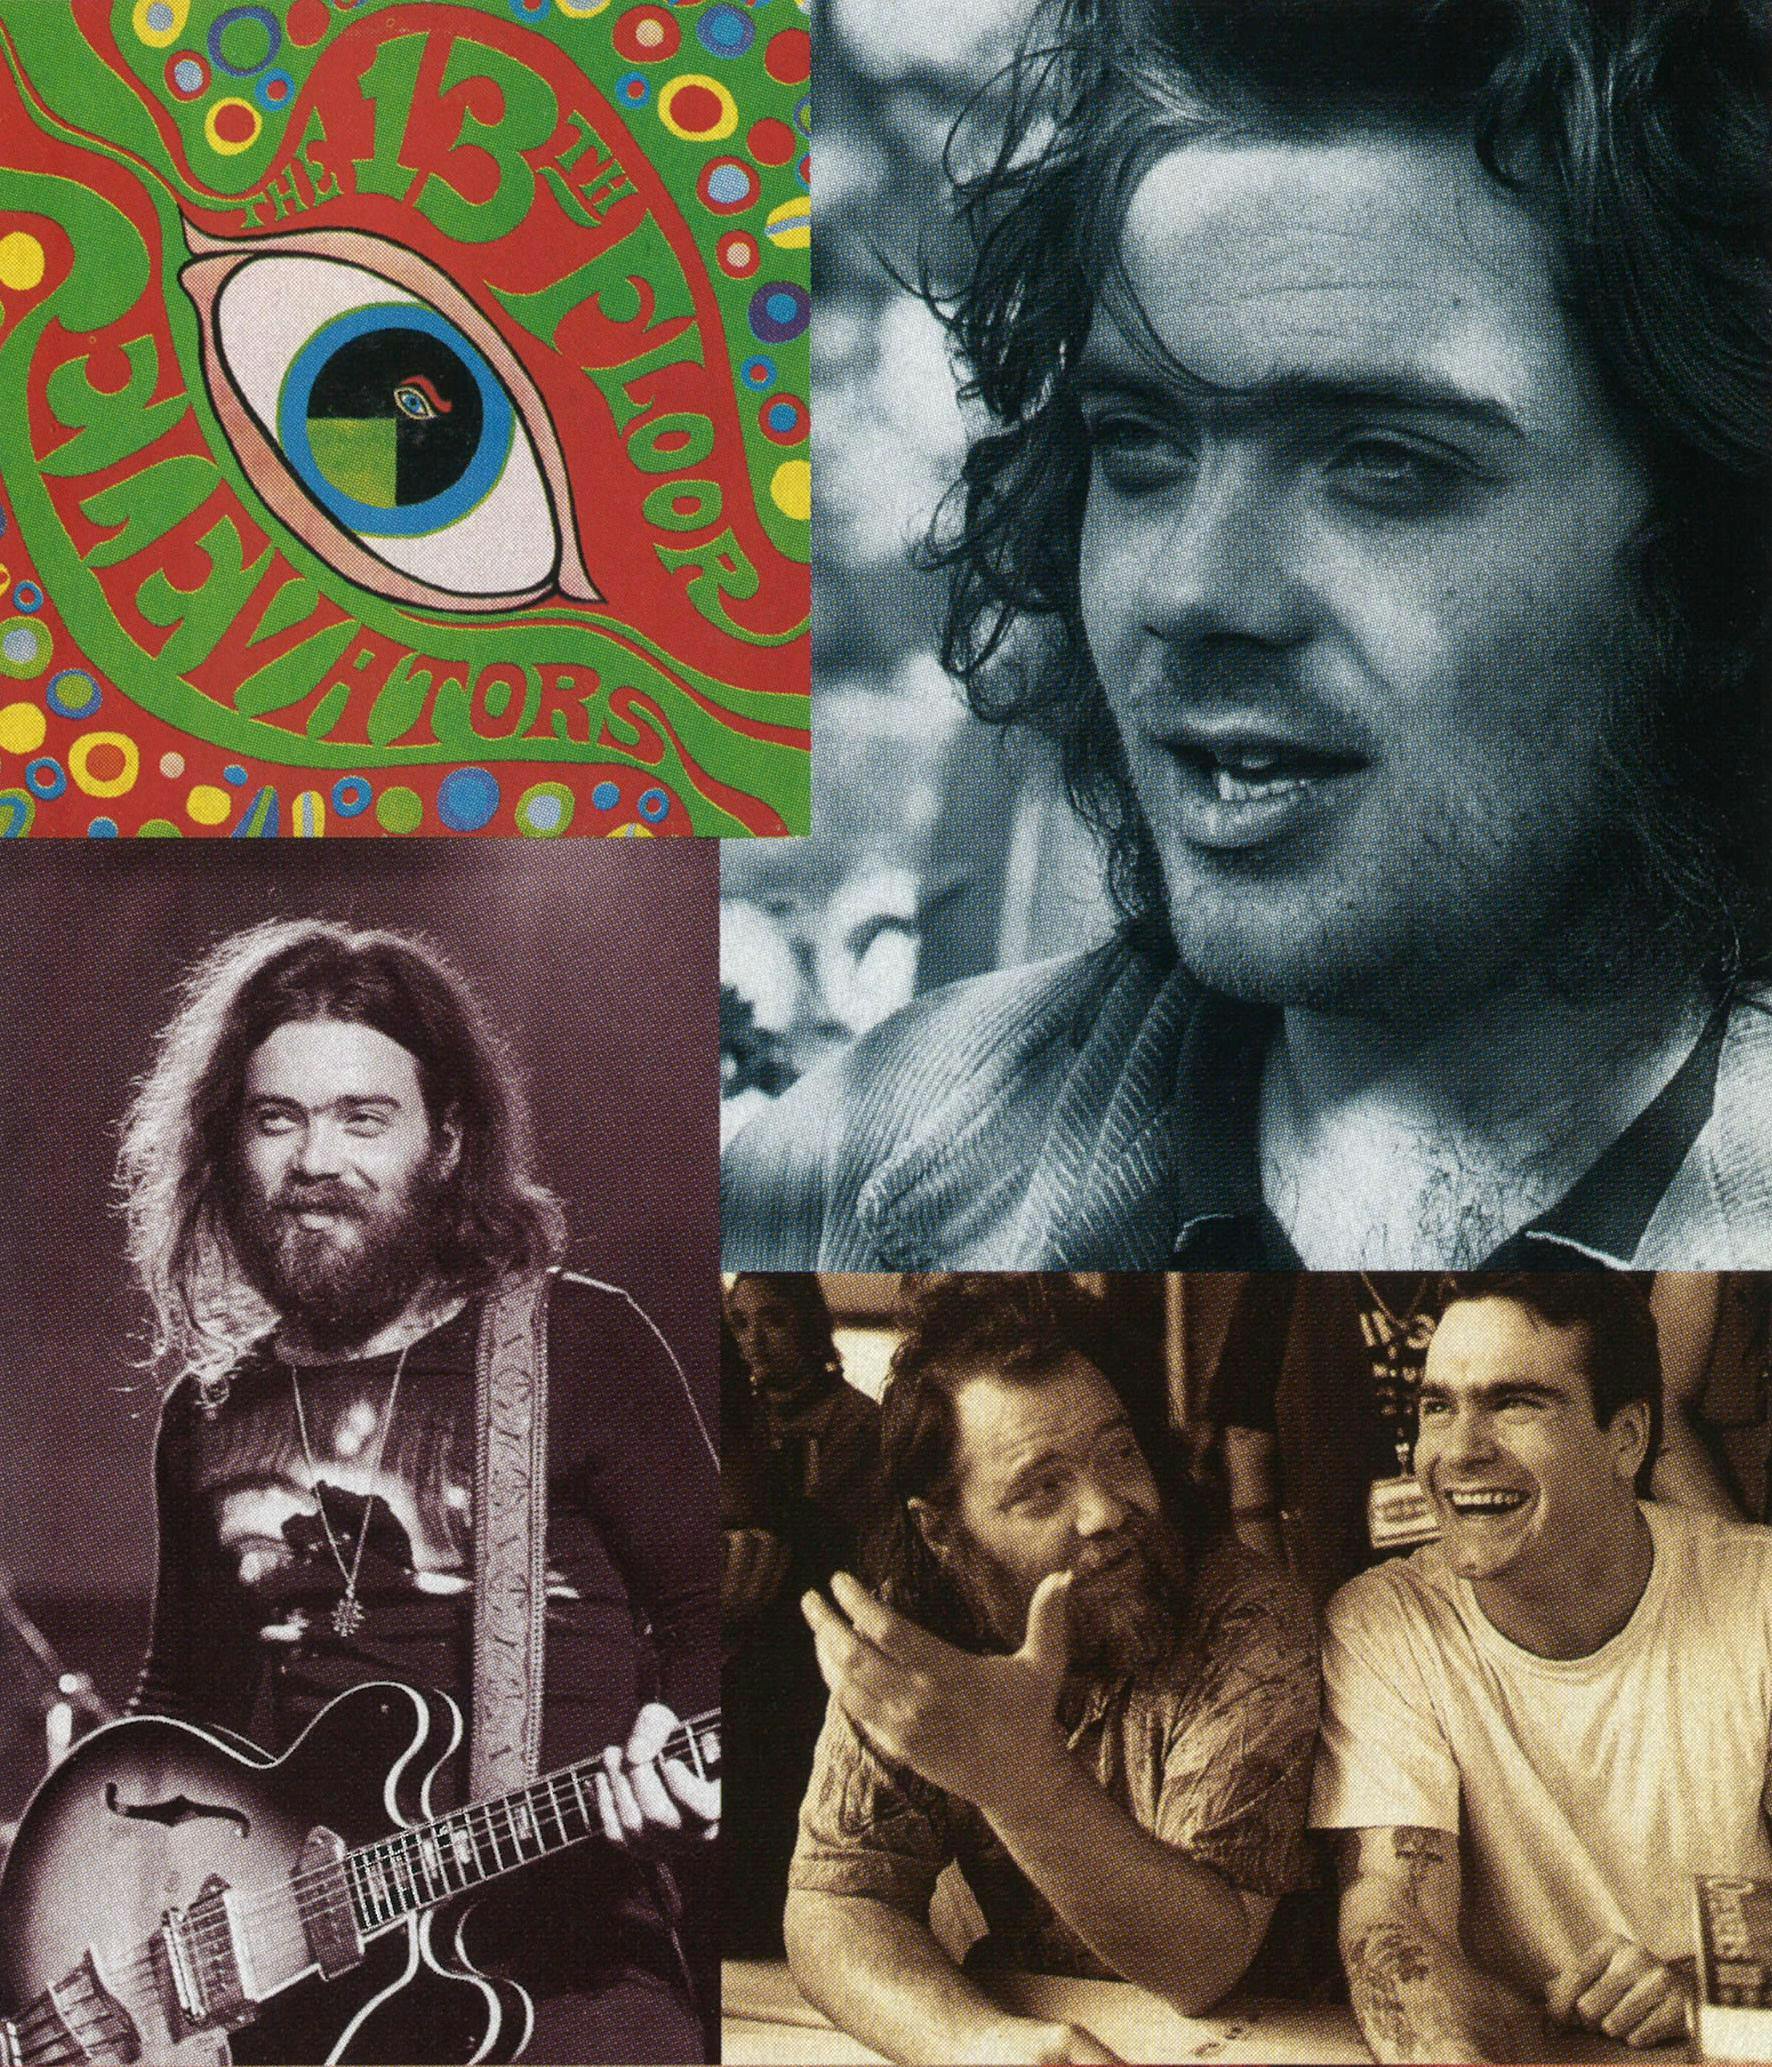 Meaning of I Walked with a Zombie by Roky Erickson